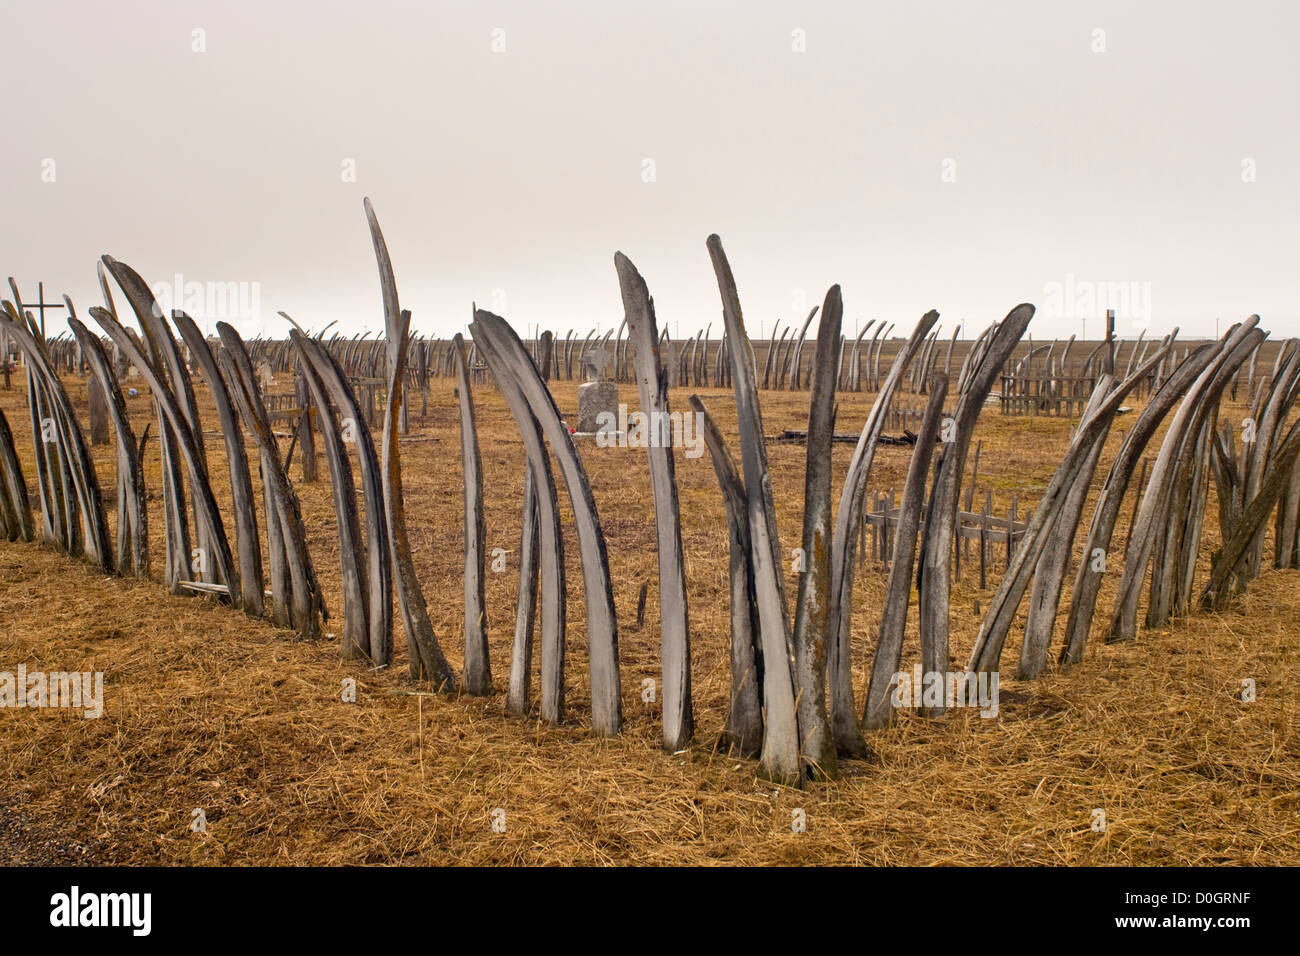 Inupiaq Graveyard Fenced With Bowhead Whale Bones Stock Photo